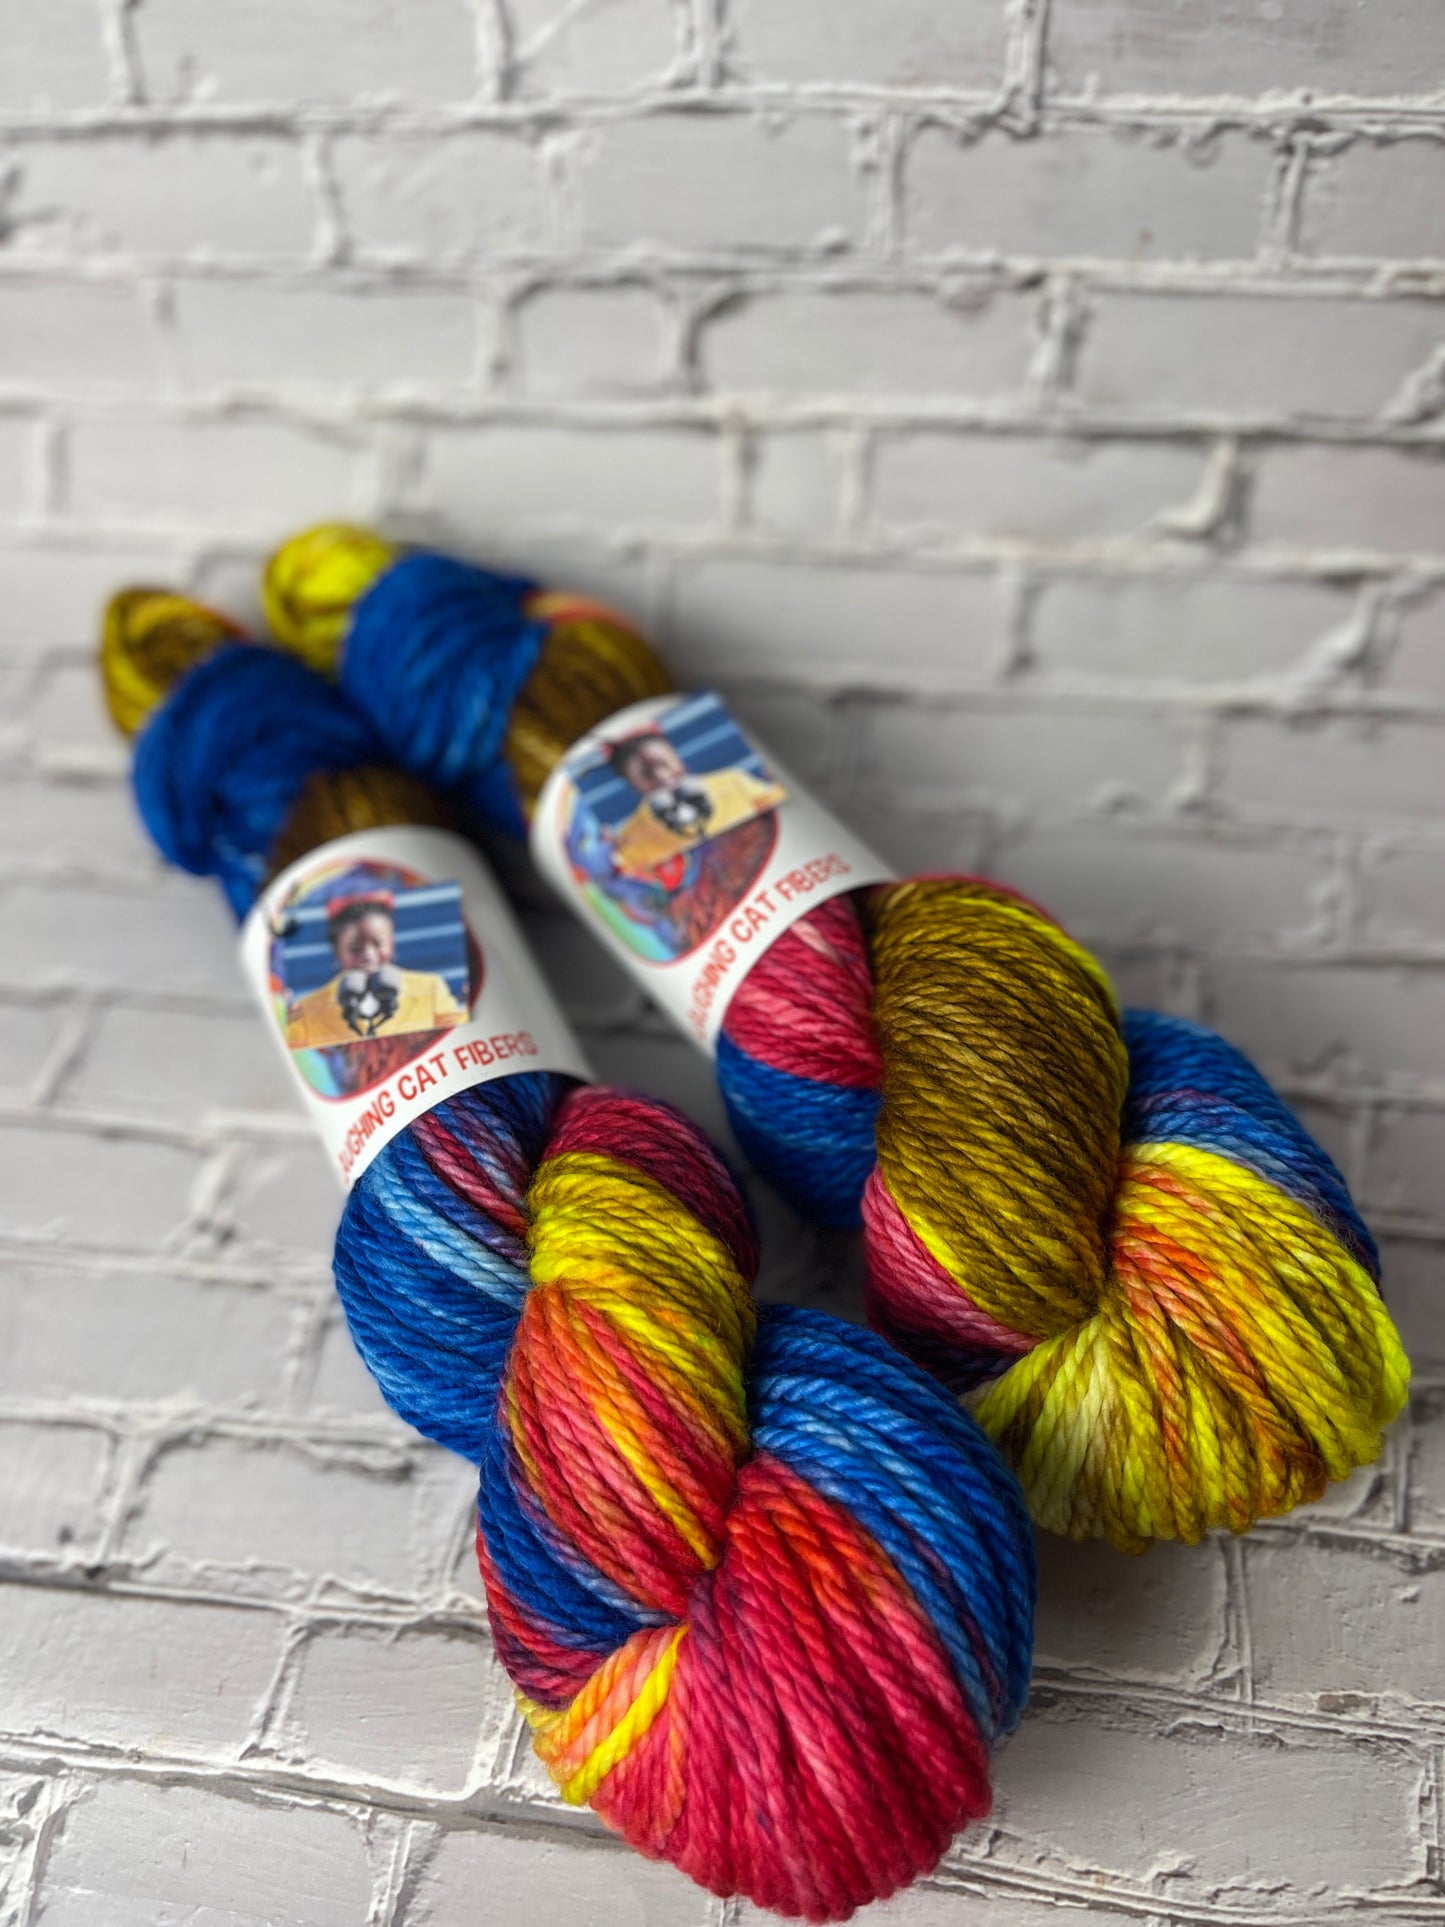 "The Hill We Climb" on Various Yarn Bases